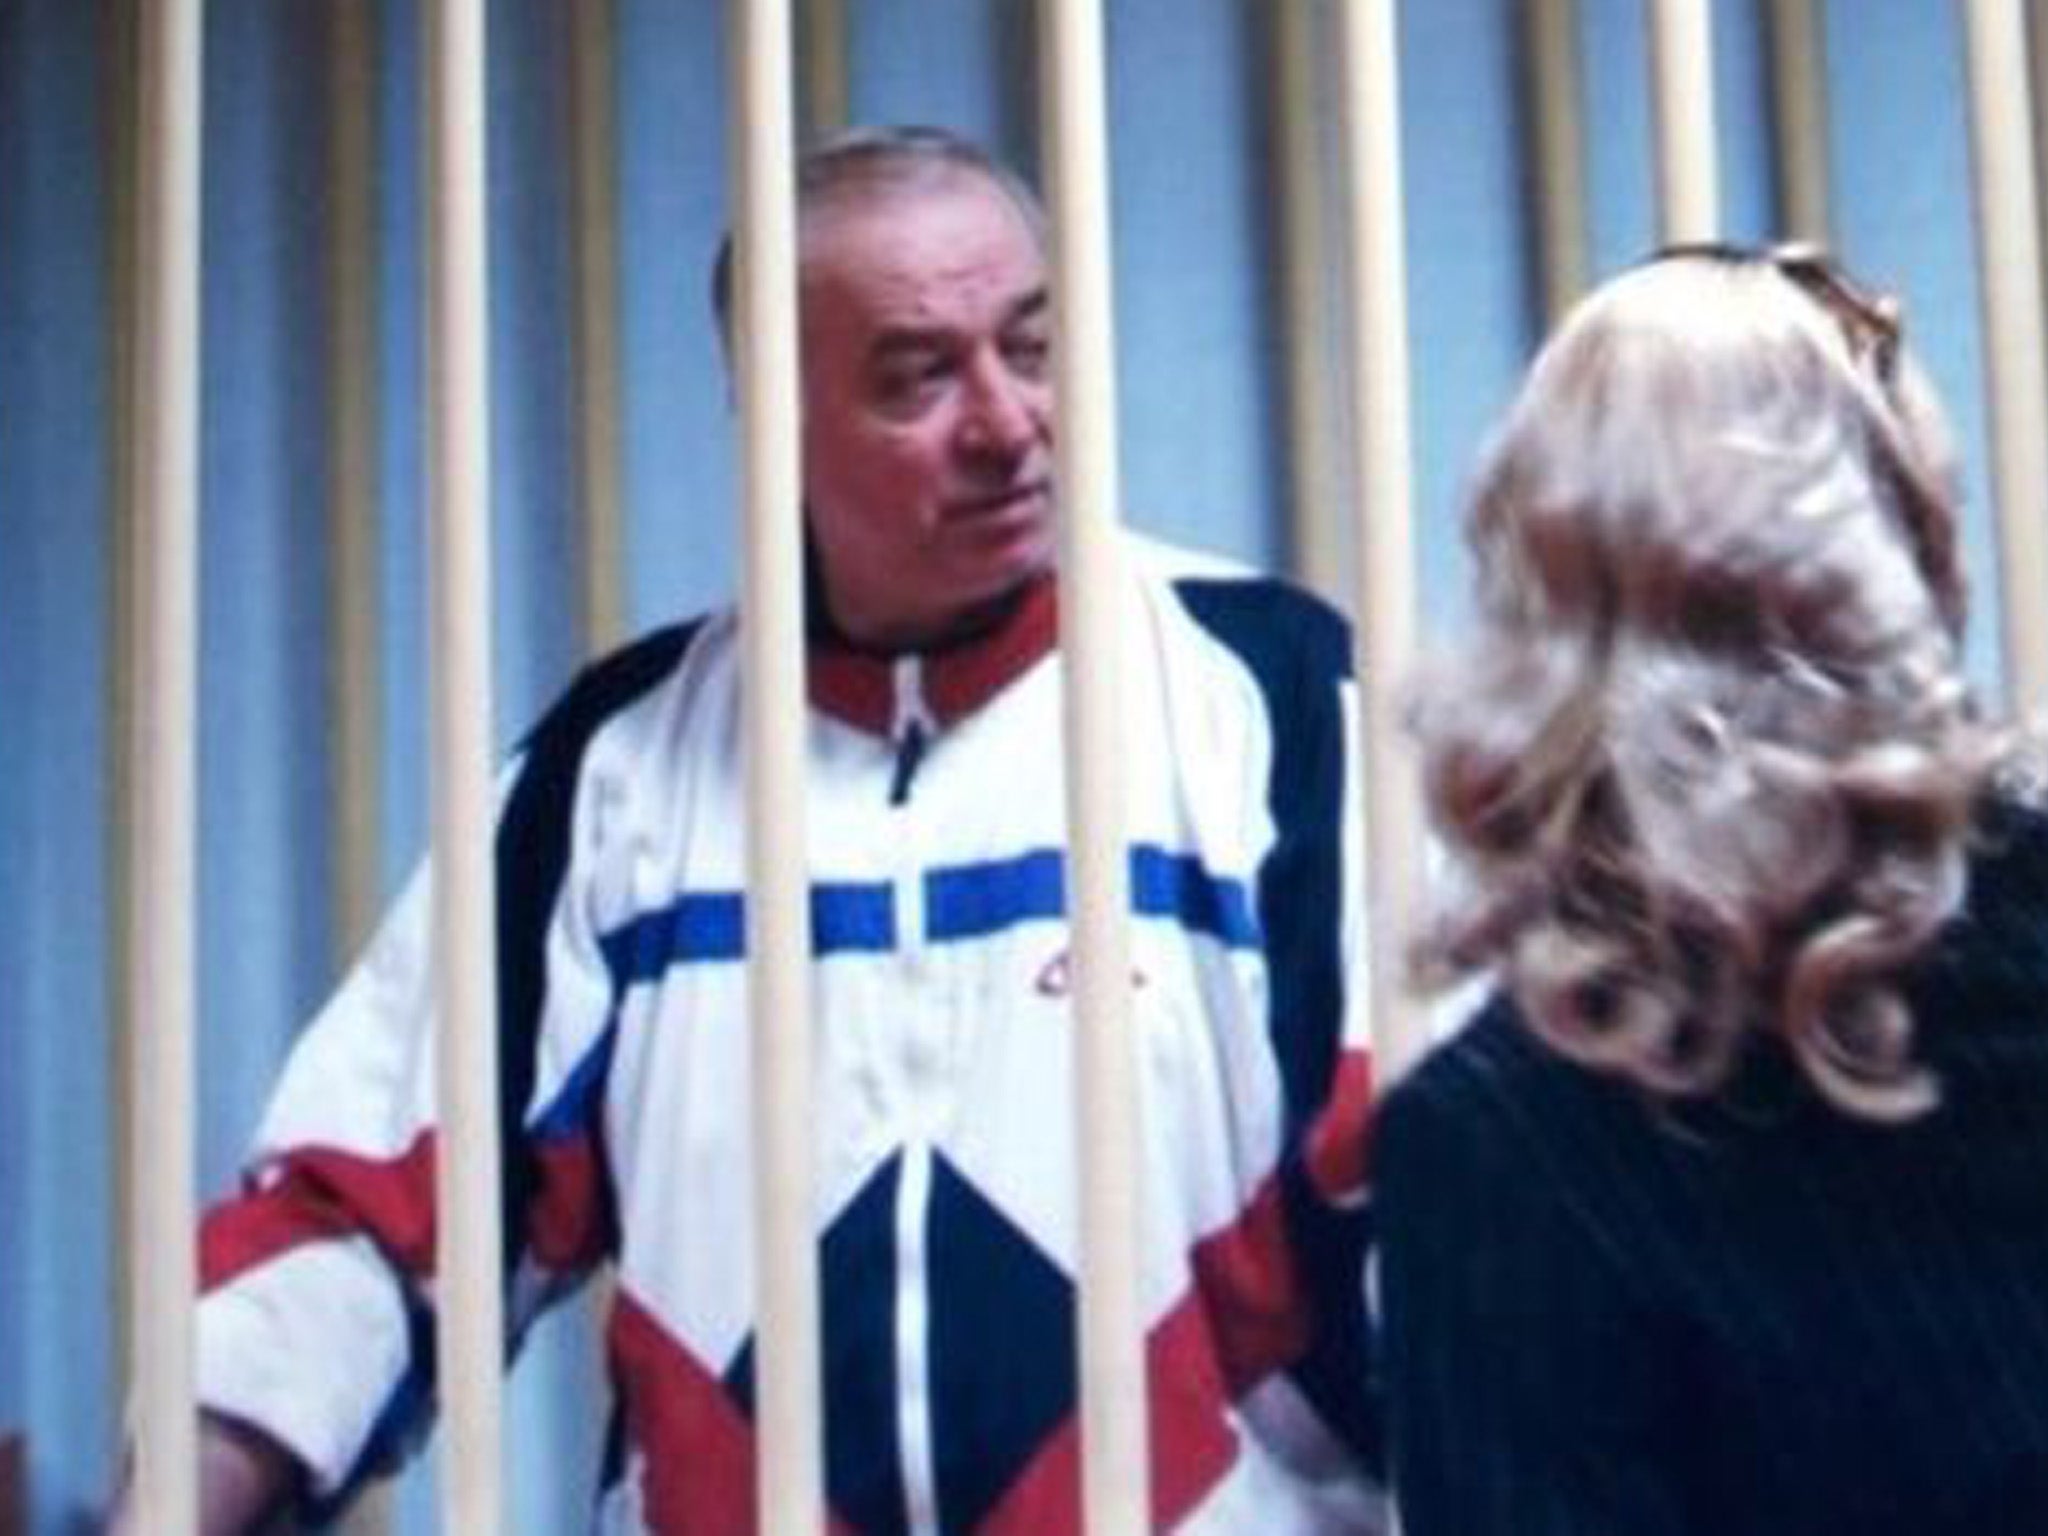 Sergei Skripal is a double agent given refuge in the UK after being jailed in Moscow for spying for Britain